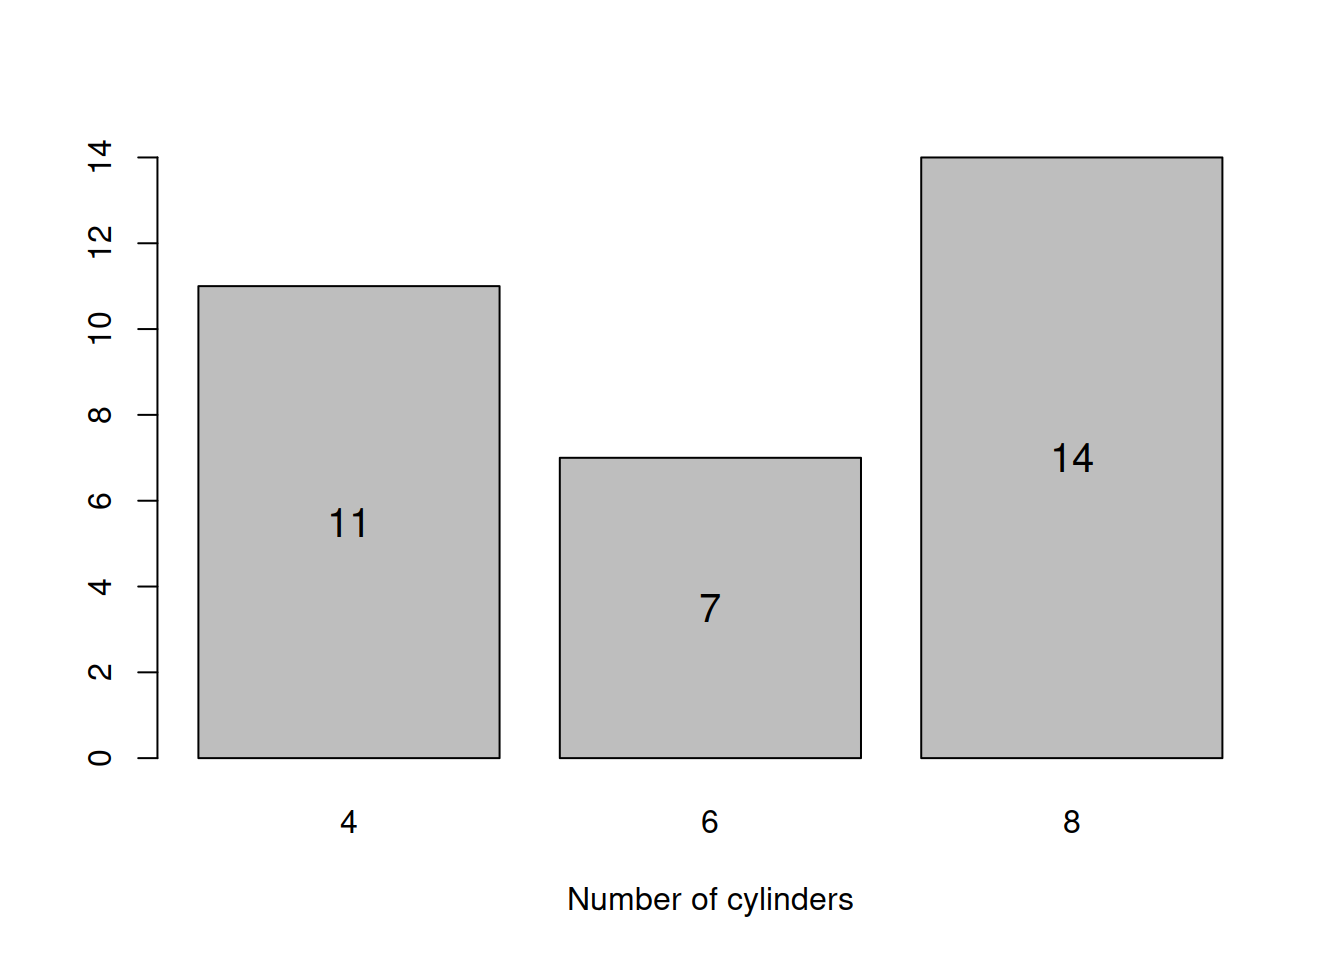 Barplot for the number of cylinders.